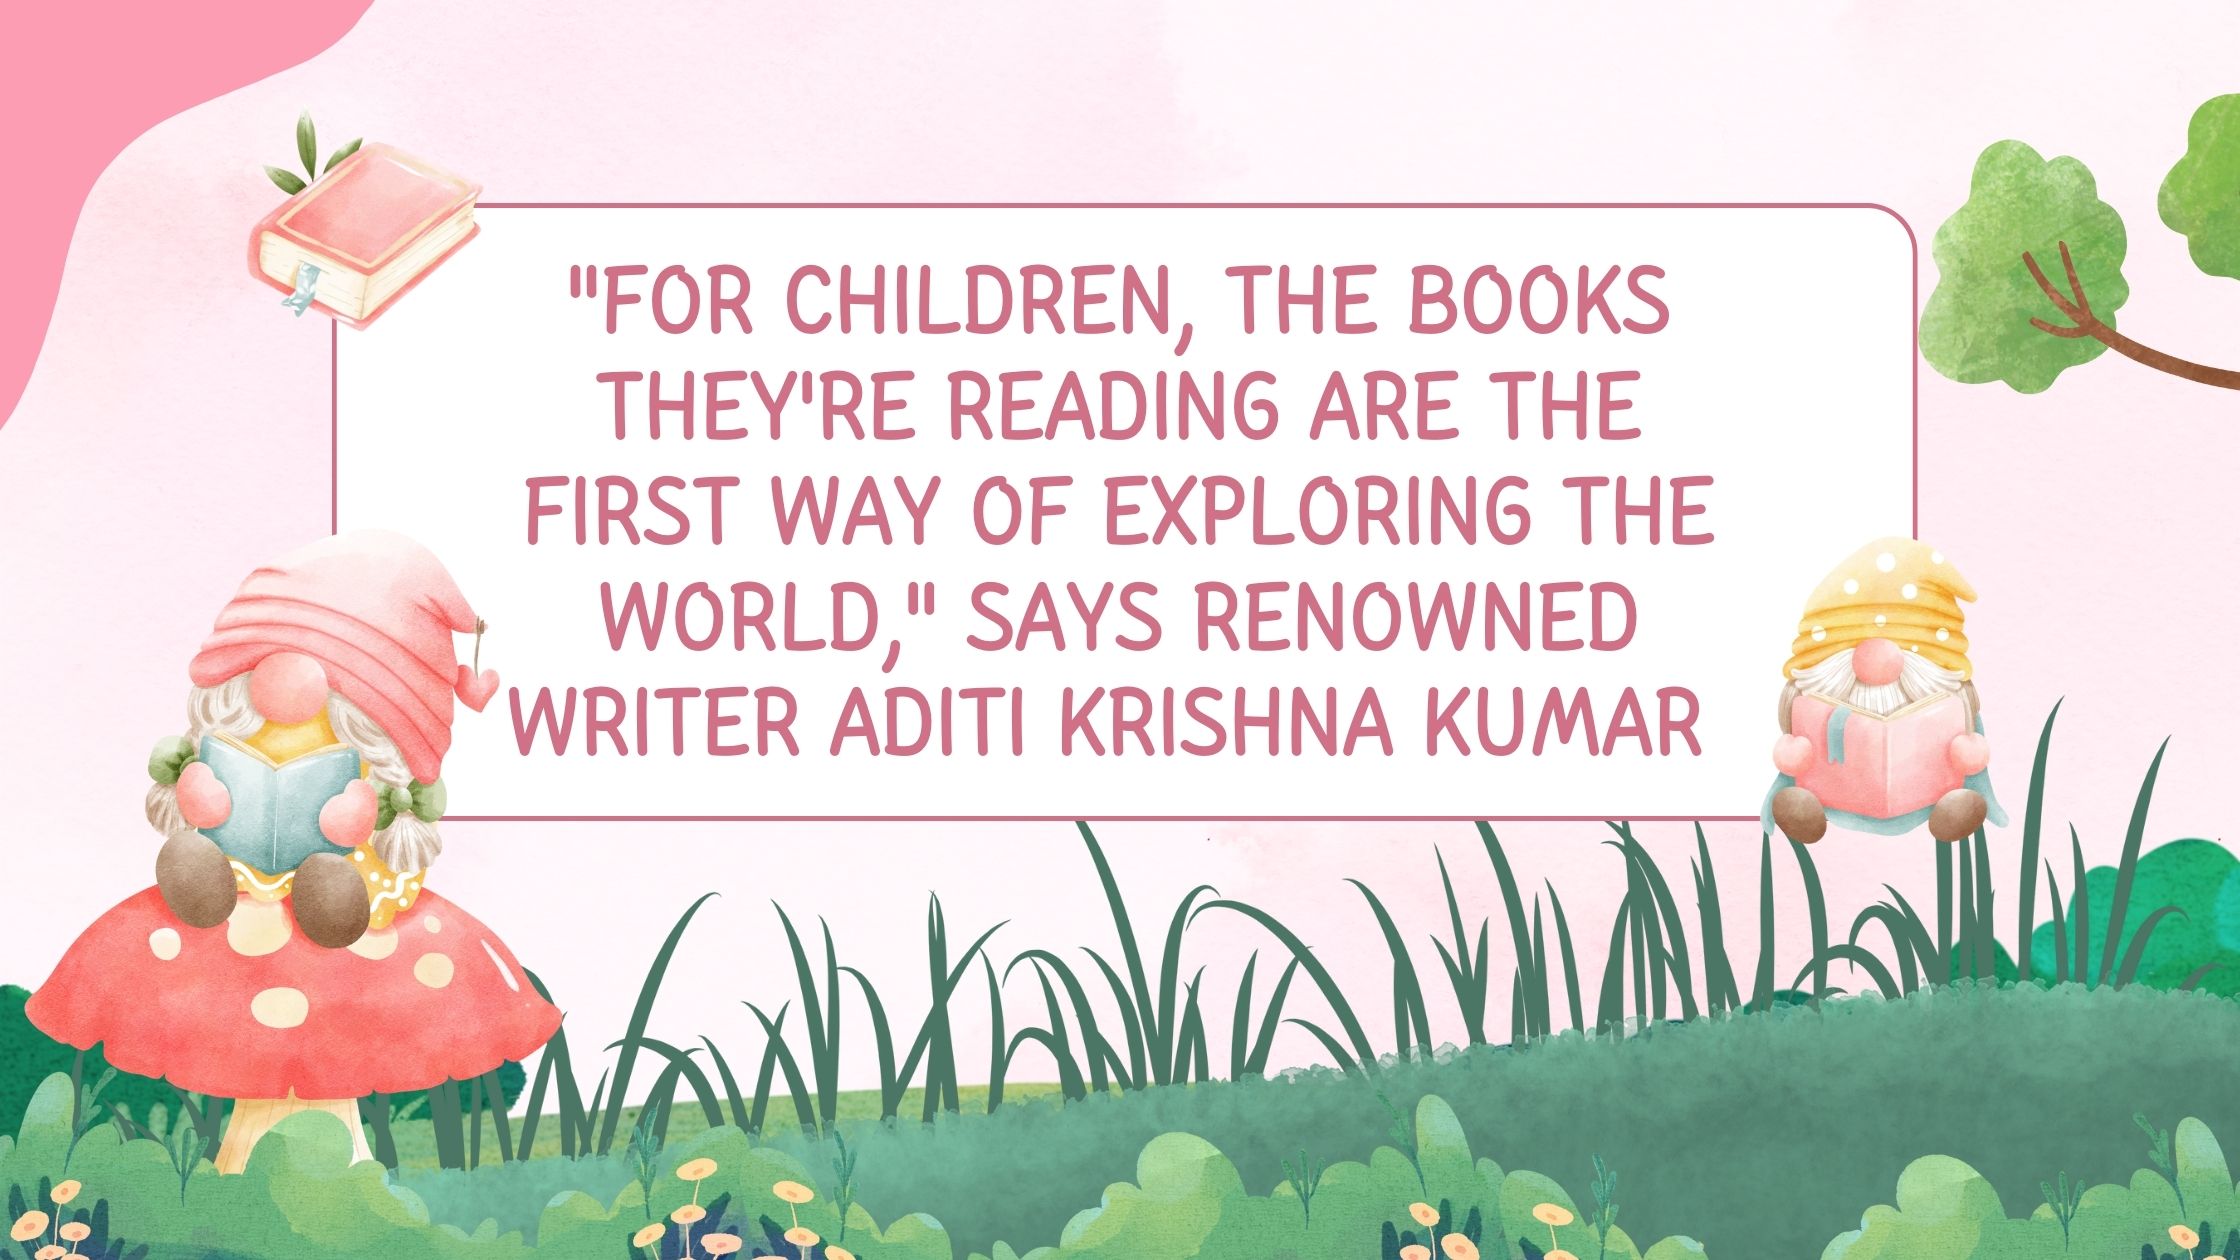 “For children, the books they’re reading are the first way of exploring the world,” says renowned writer Aditi Krishna Kumar